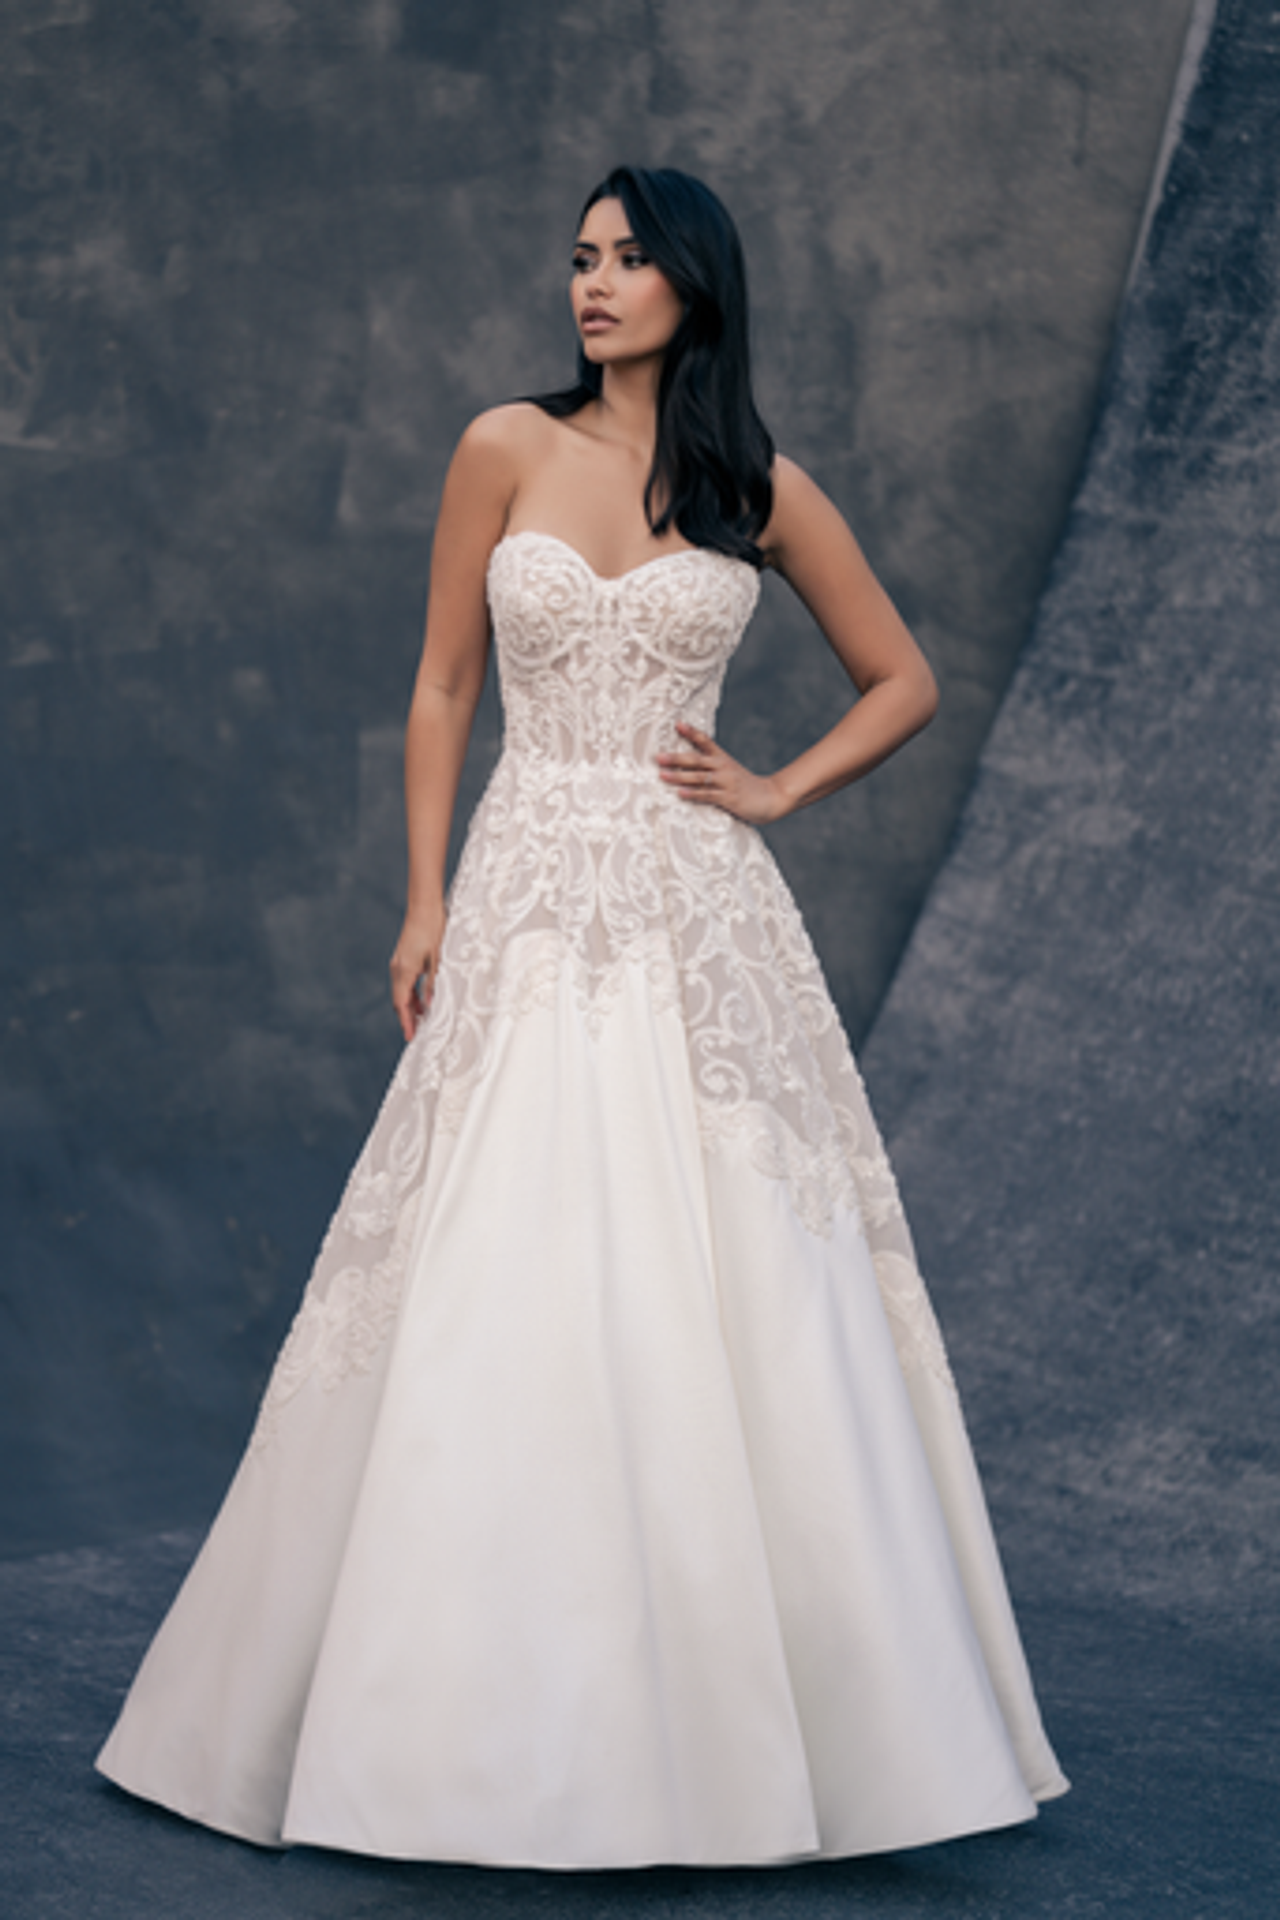 Classic And Romantic Strapless Silk Gown by Allure Bridals